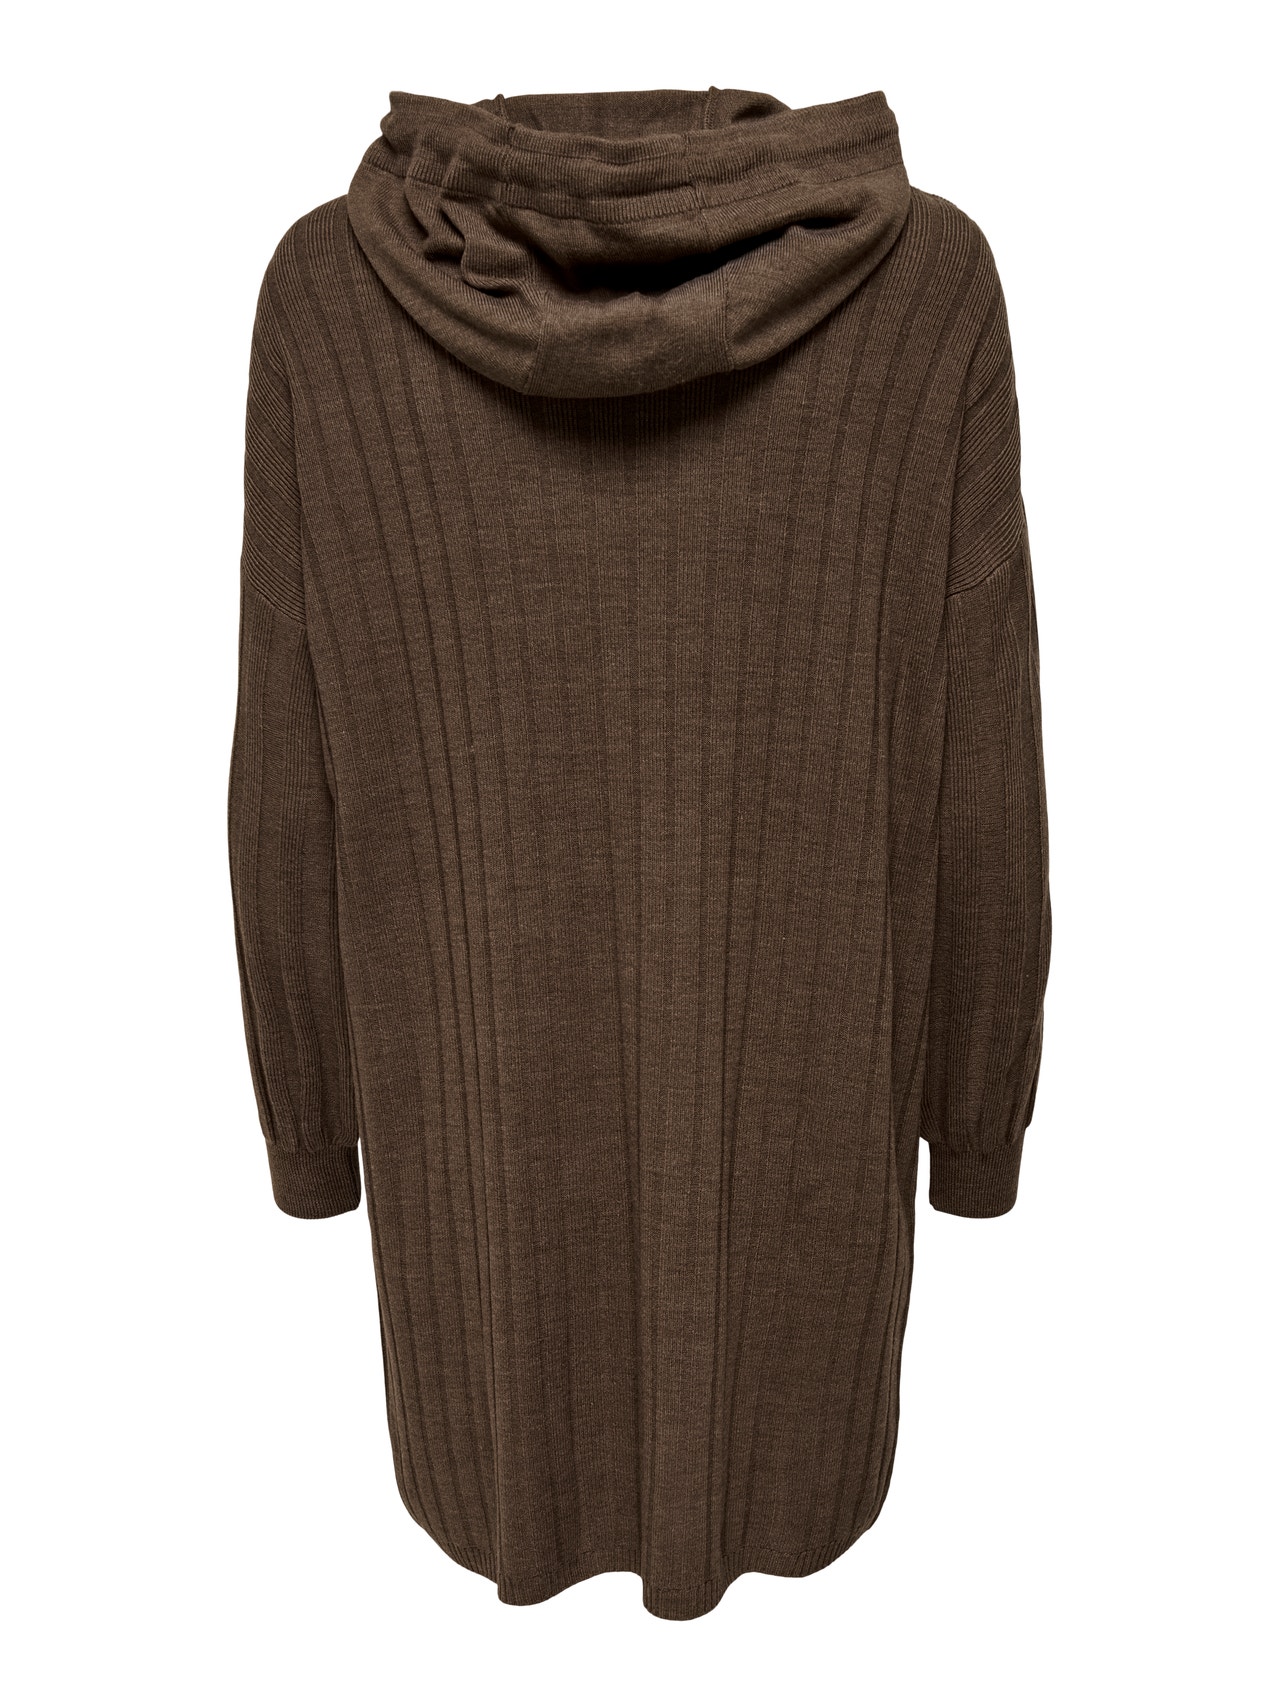 ONLY Loose Fit Hoodie Long dress -Chestnut - 15267699